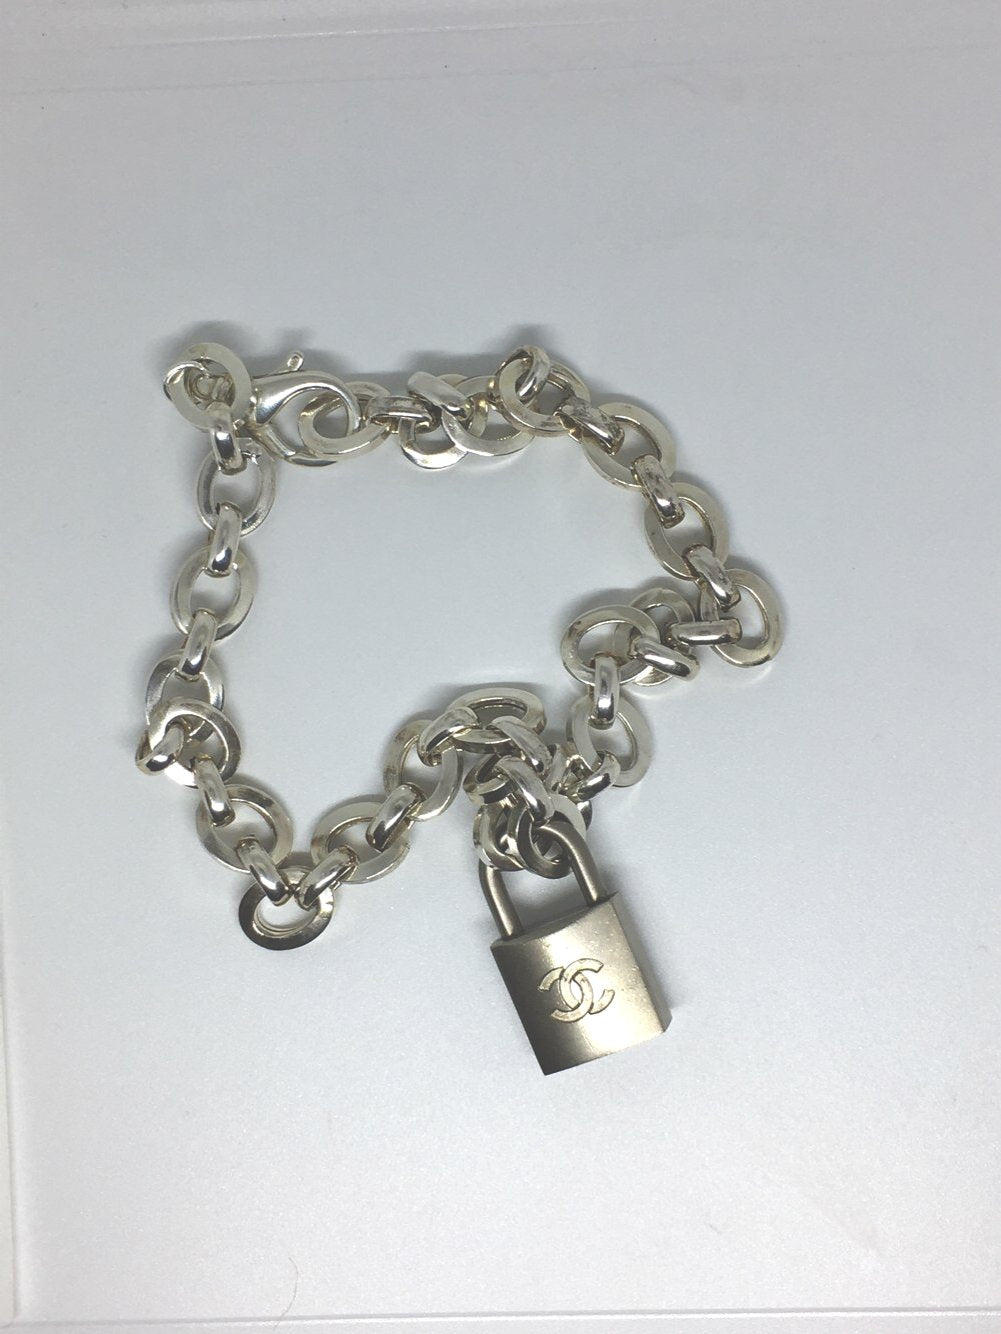 100% Authentic Vintage Repurposed Chanel Silver Lock Necklace